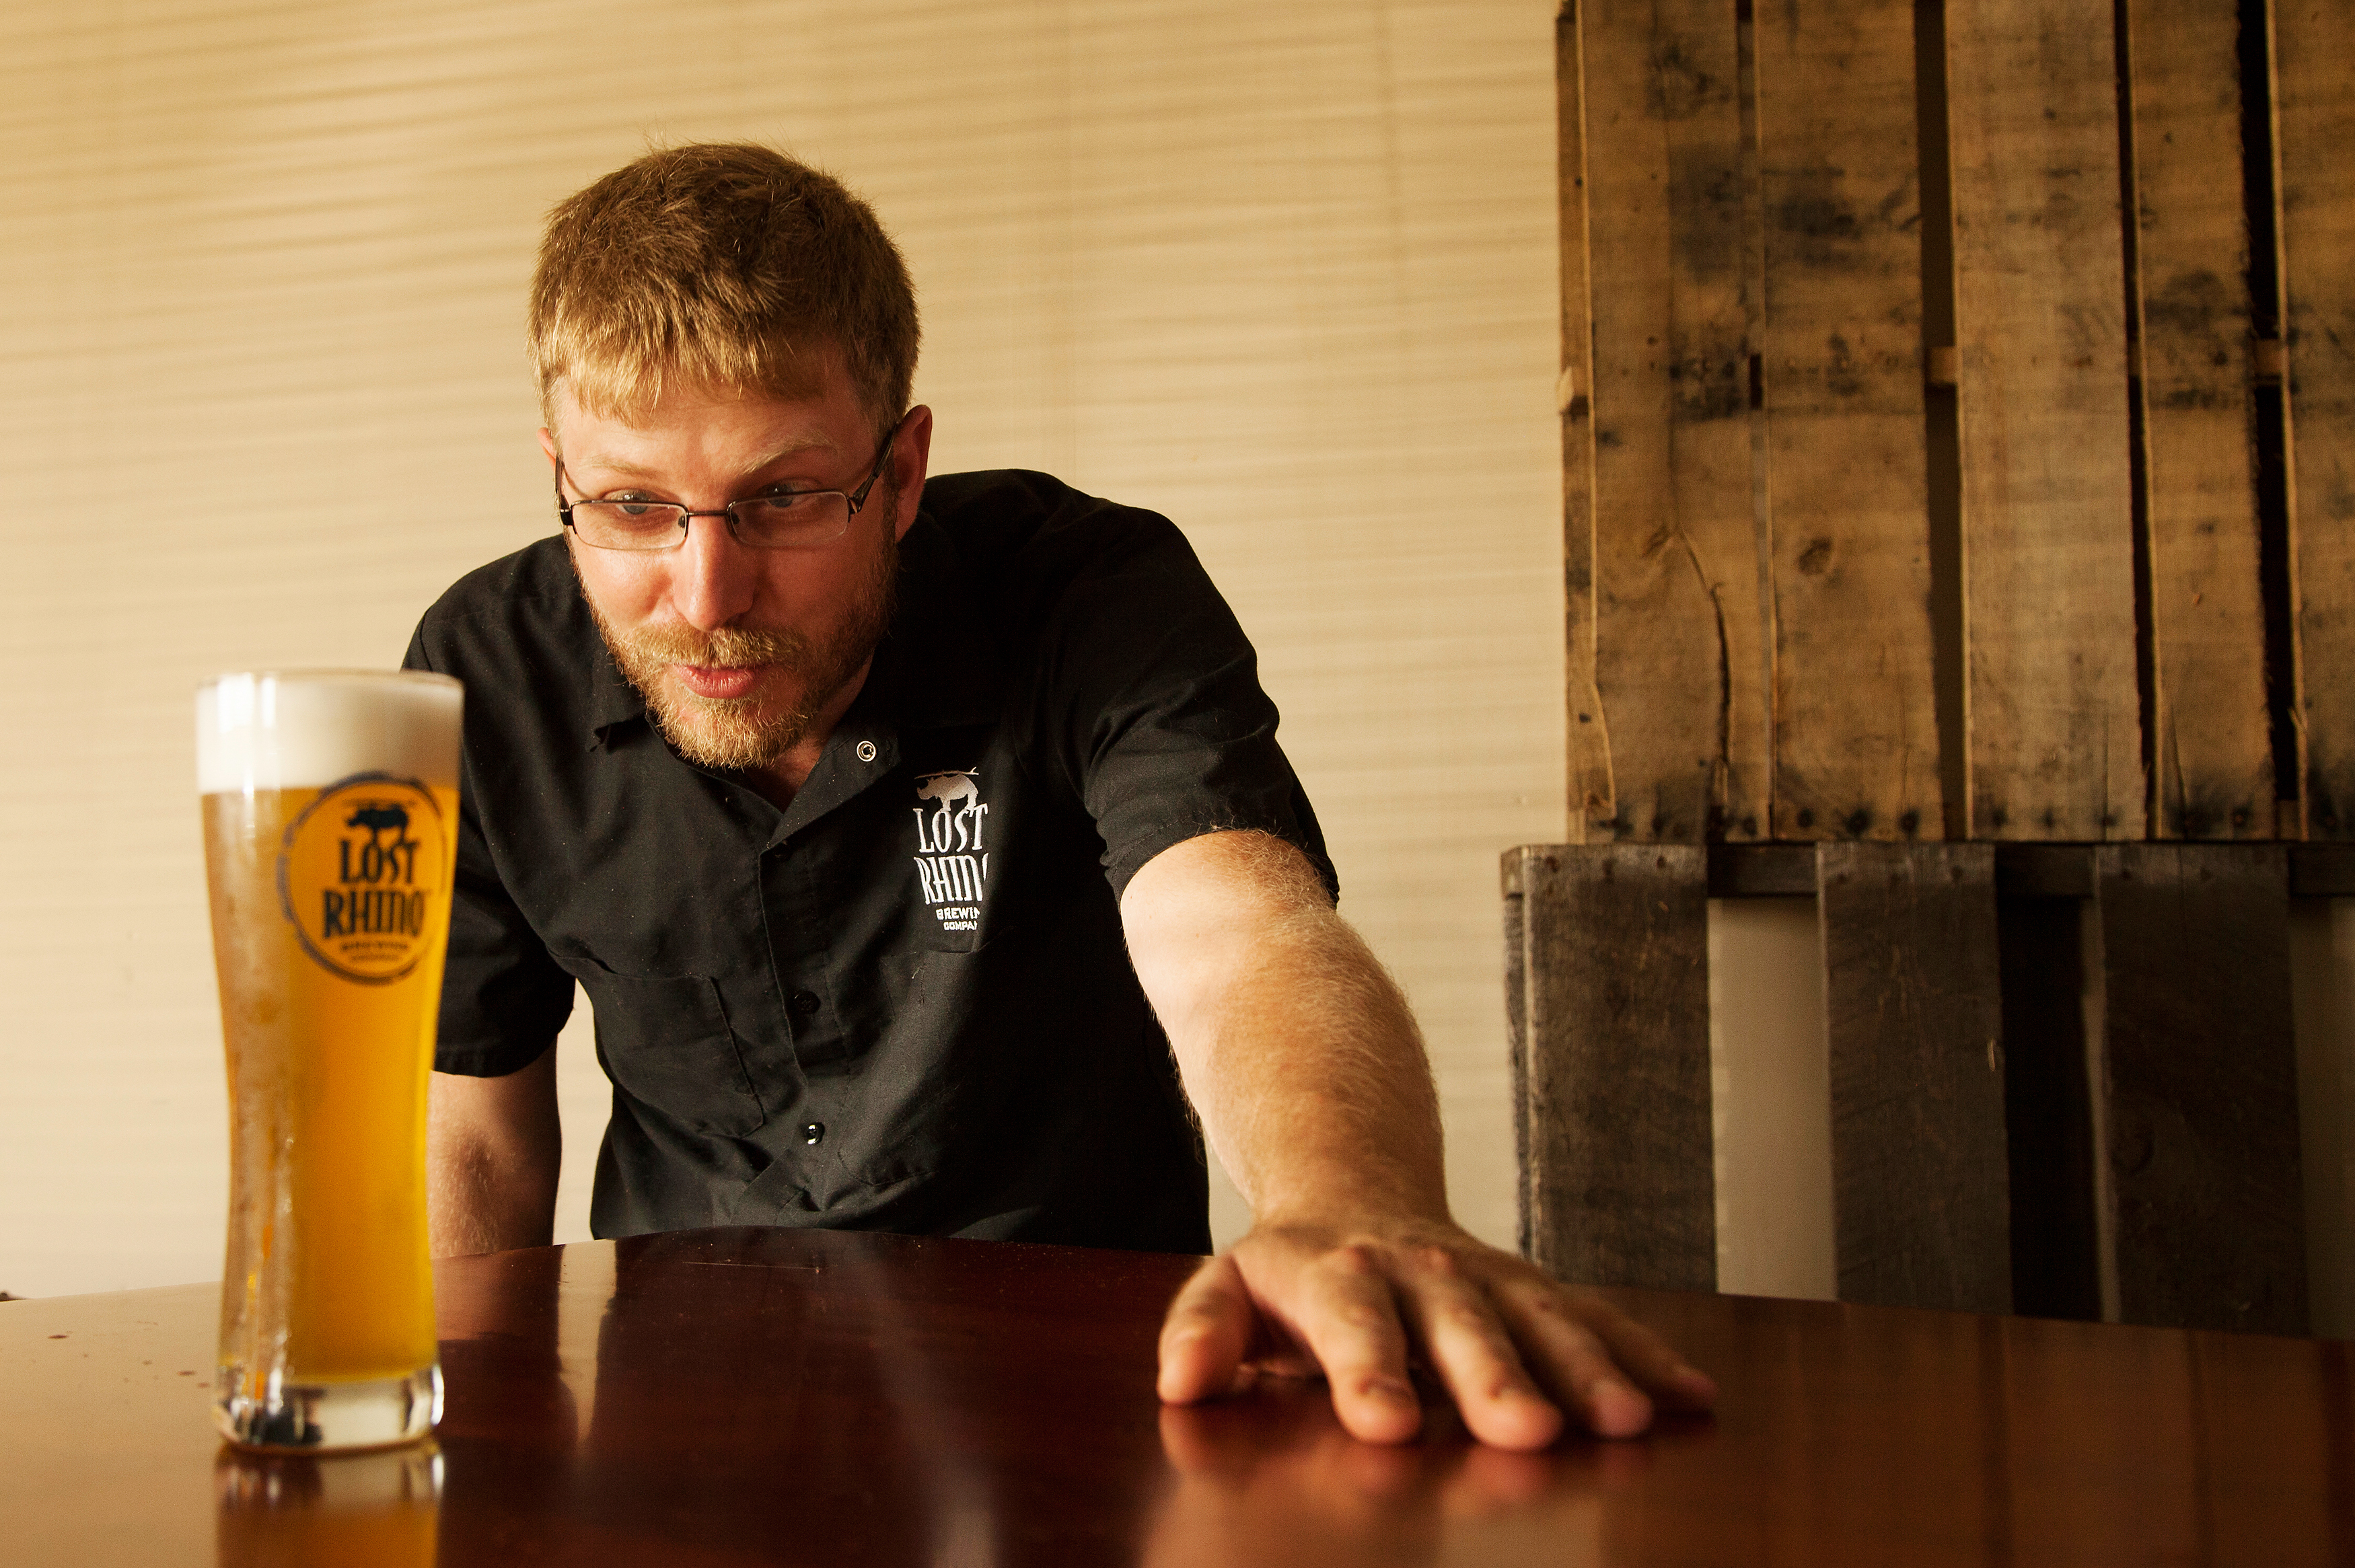 Jasper Akerboom of the Lost Rhino Brewing Co. in Ashburn, Va., tested a dozen yeasts before finding one that was perfect for making bone beer. Photo: Ryan Kellman/NPR